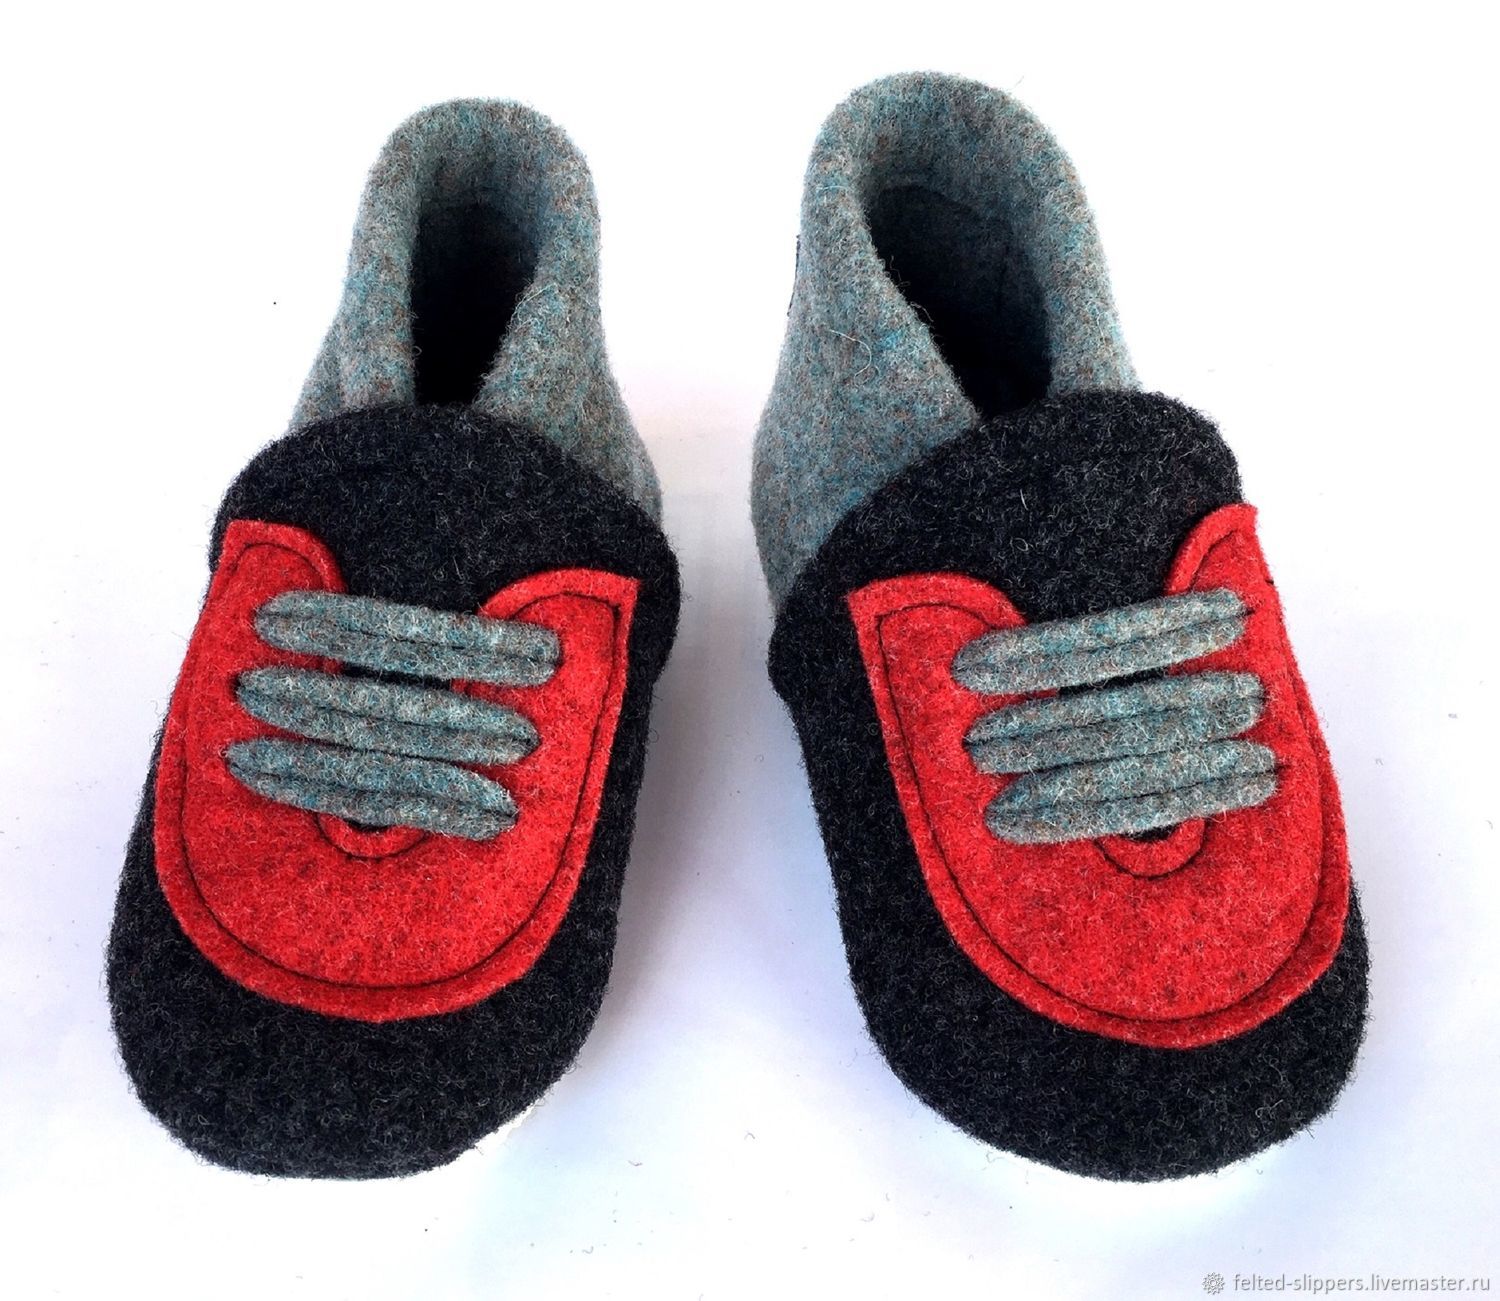 shoes made of wool